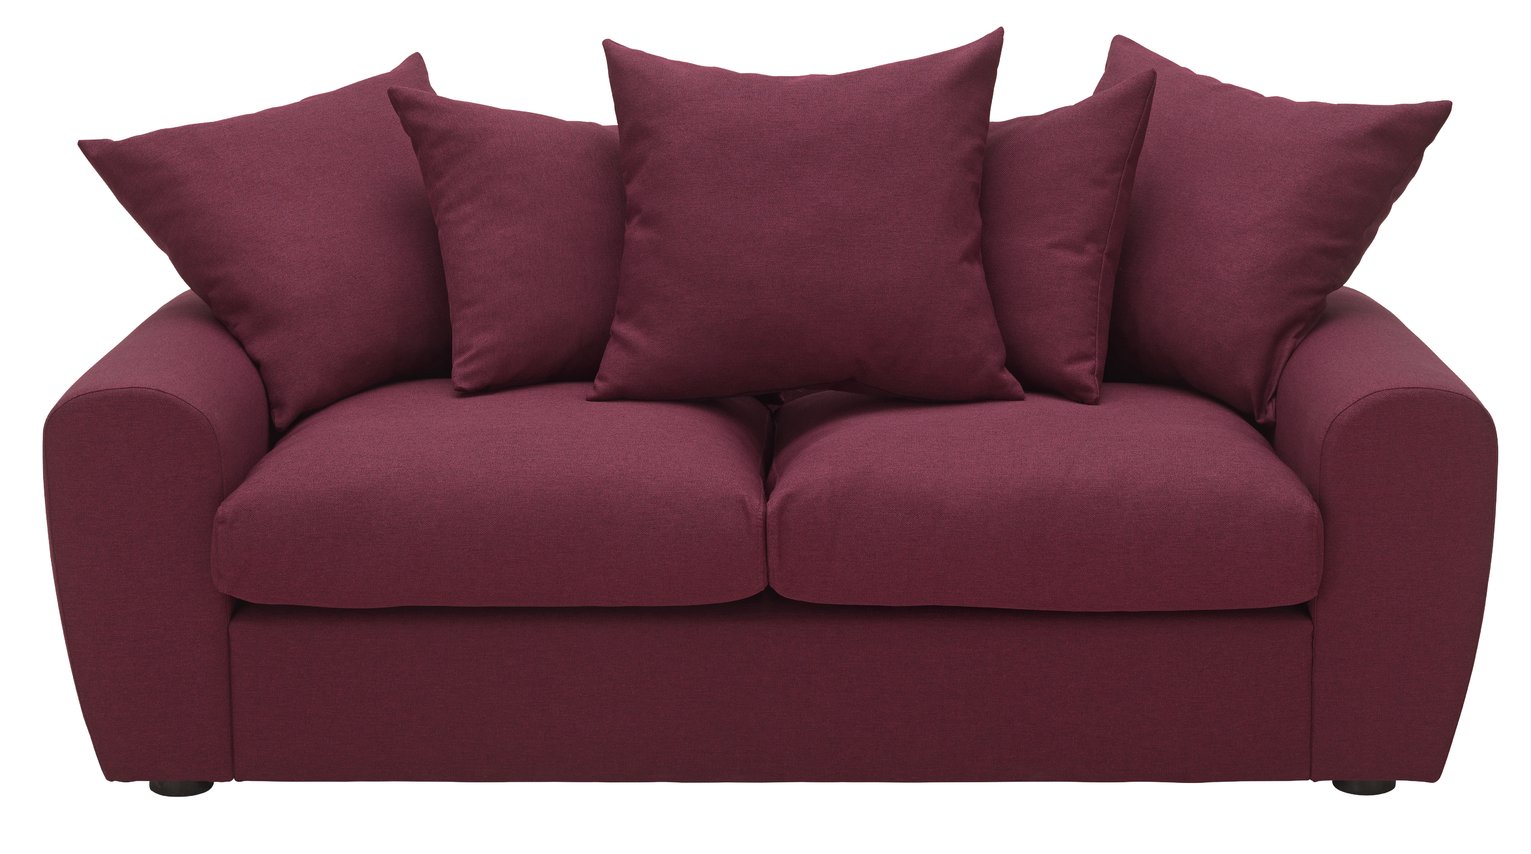 Argos Home Billow 3 Seater Fabric Sofa - Red